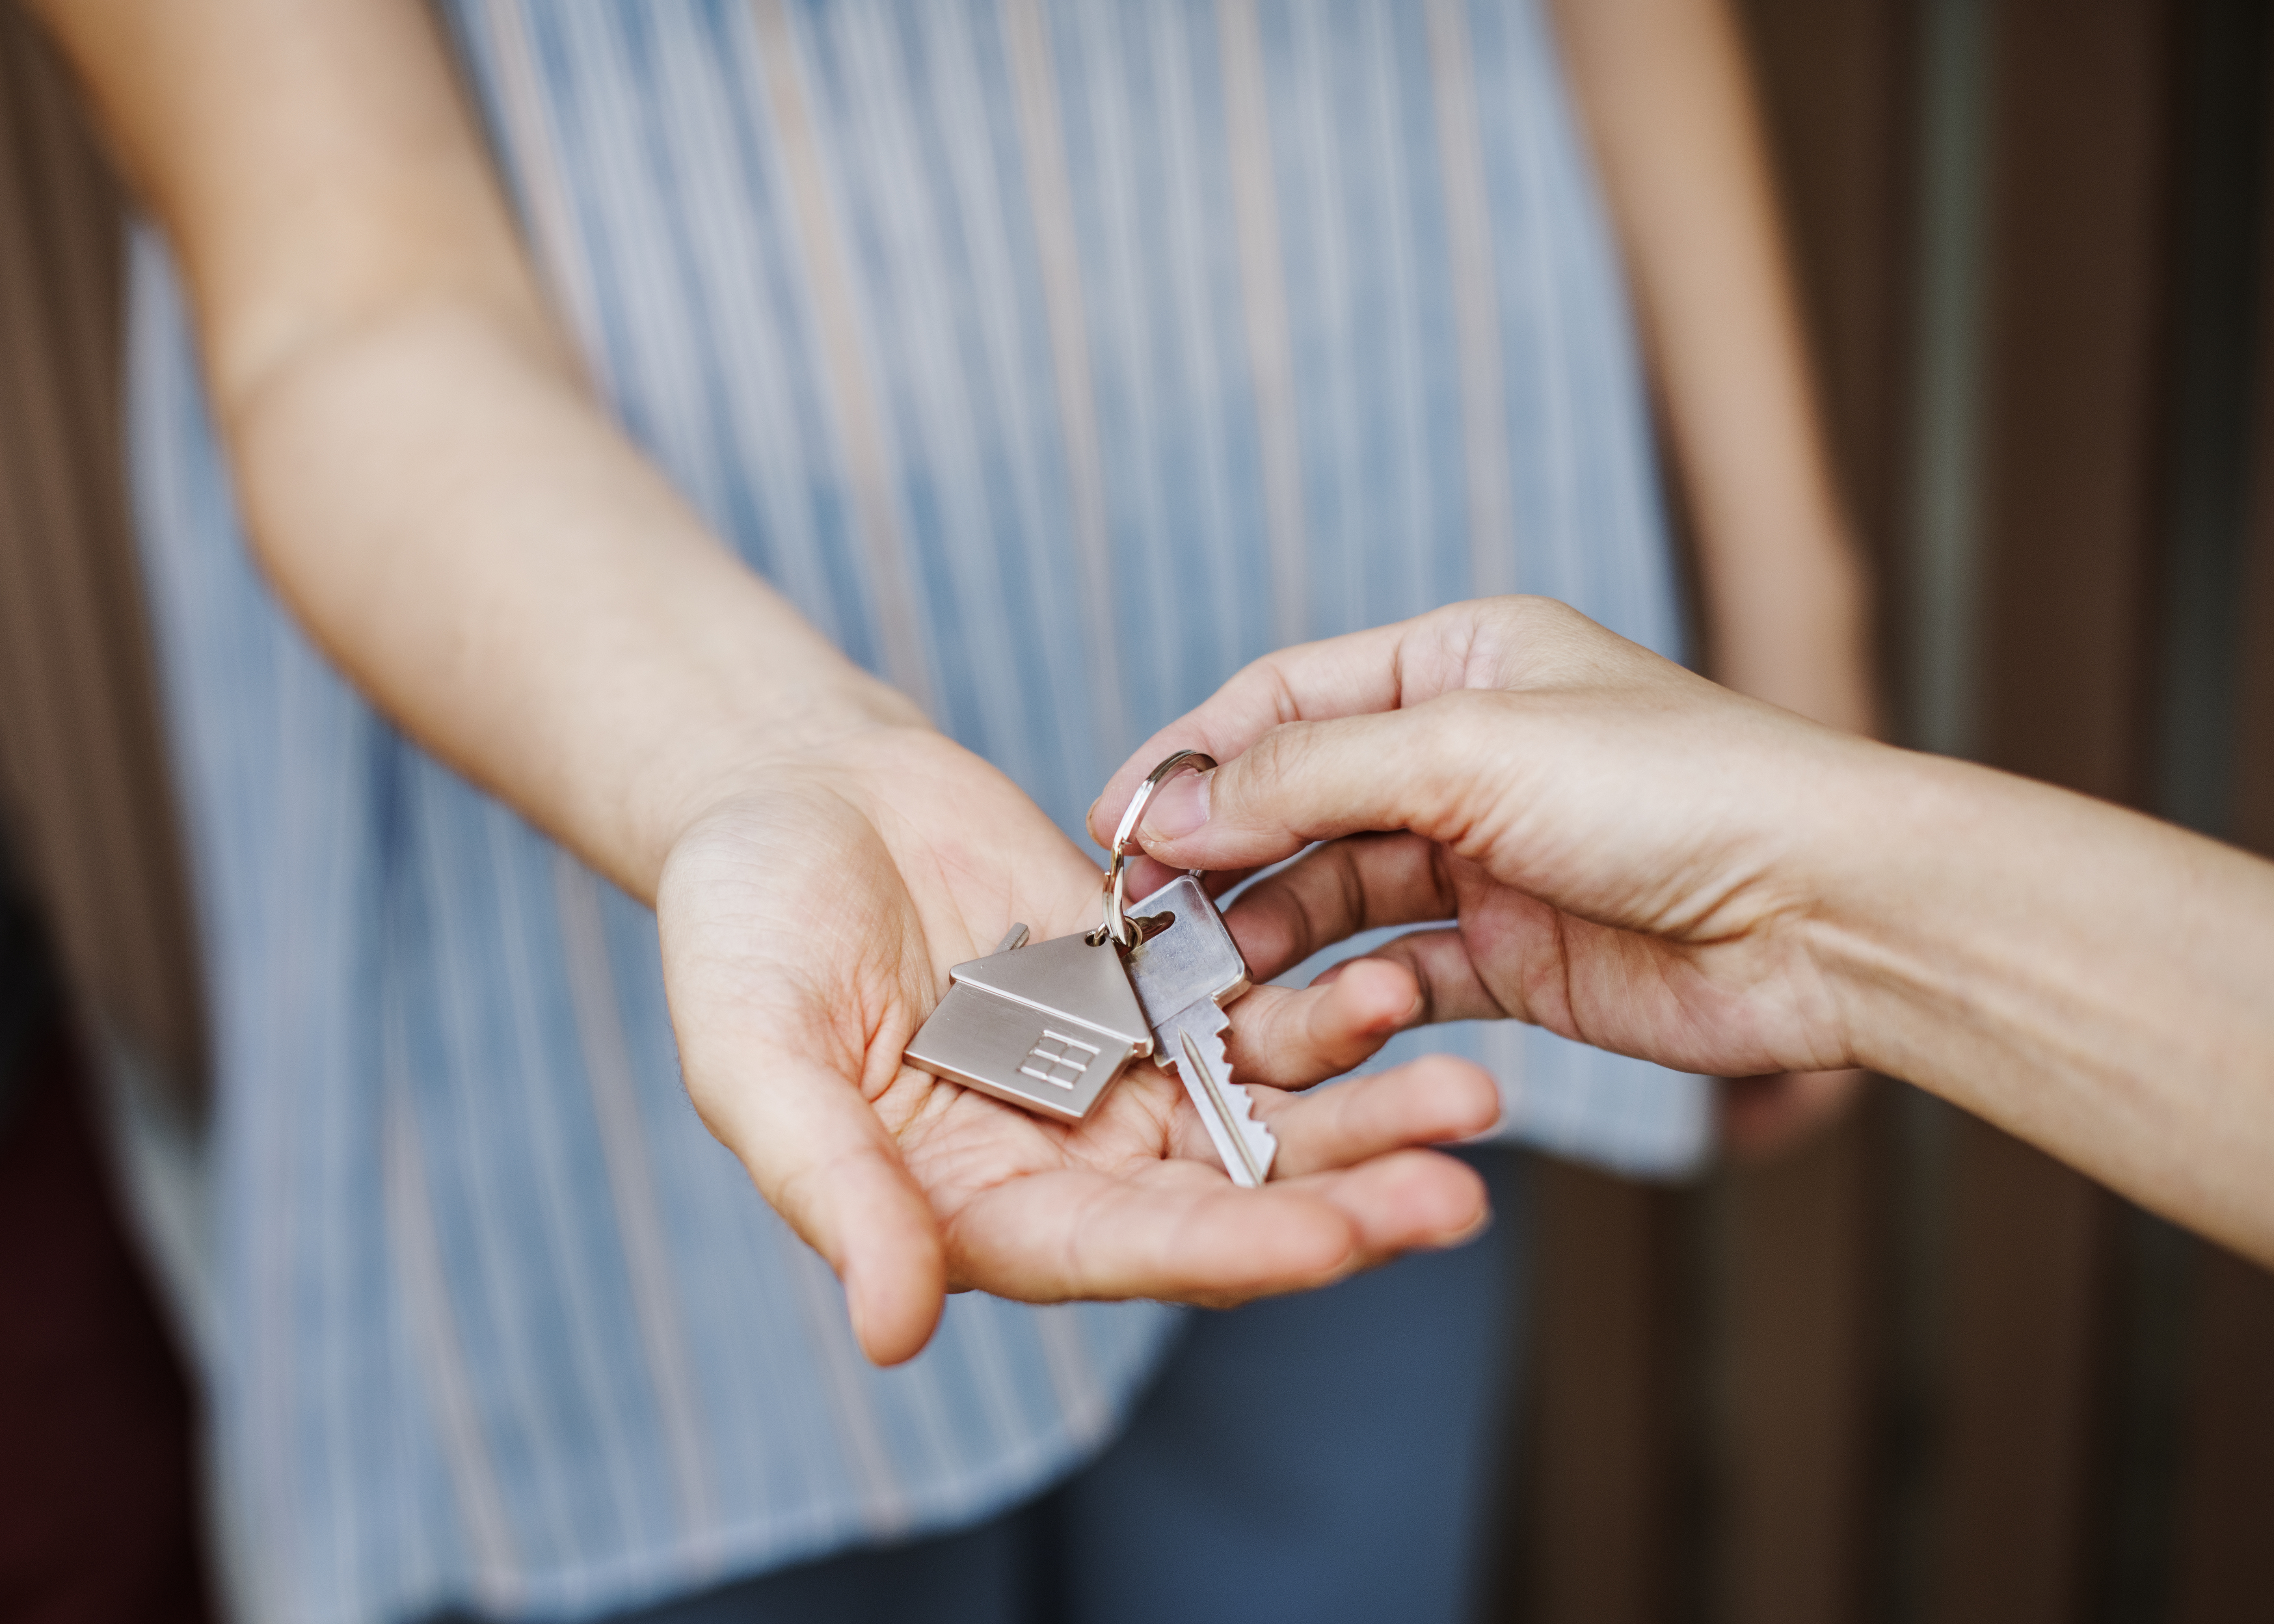 Keys with a key ring in the shape of a house, is being exchanged between two people.